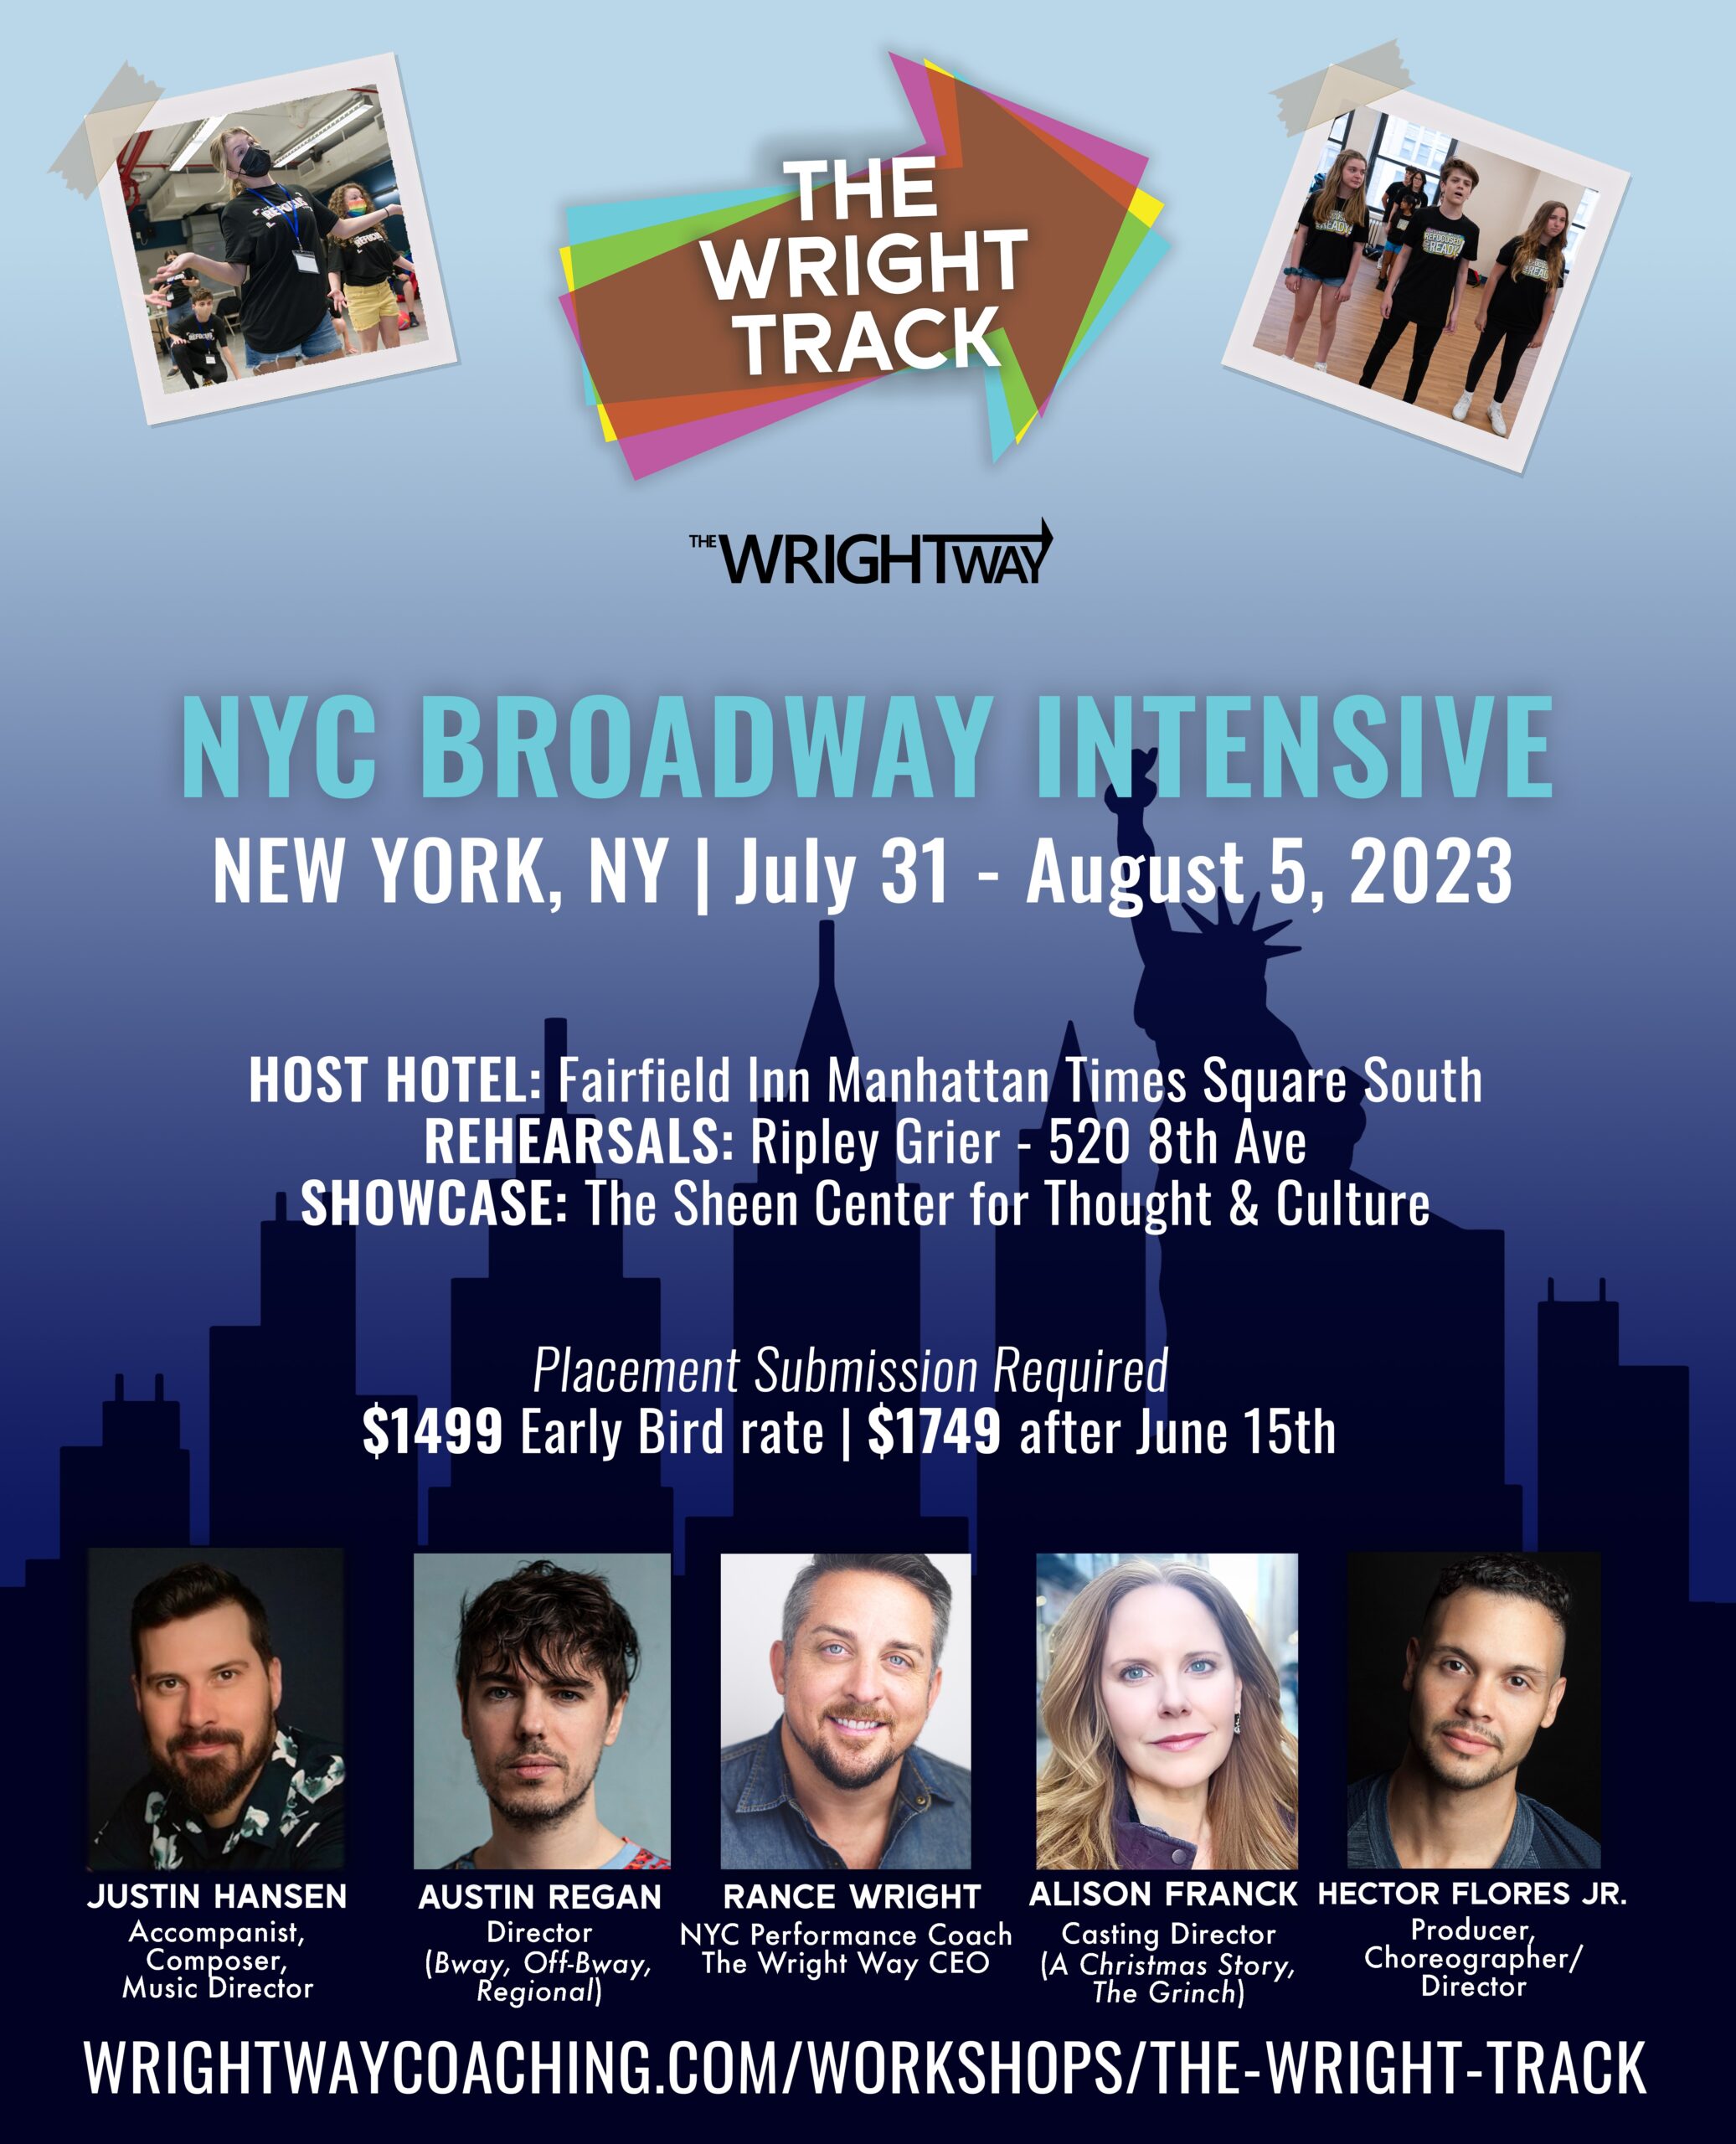 THE WRIGHT TRACK TOUR – NYC Broadway Intensive 2023 – WEEK 1